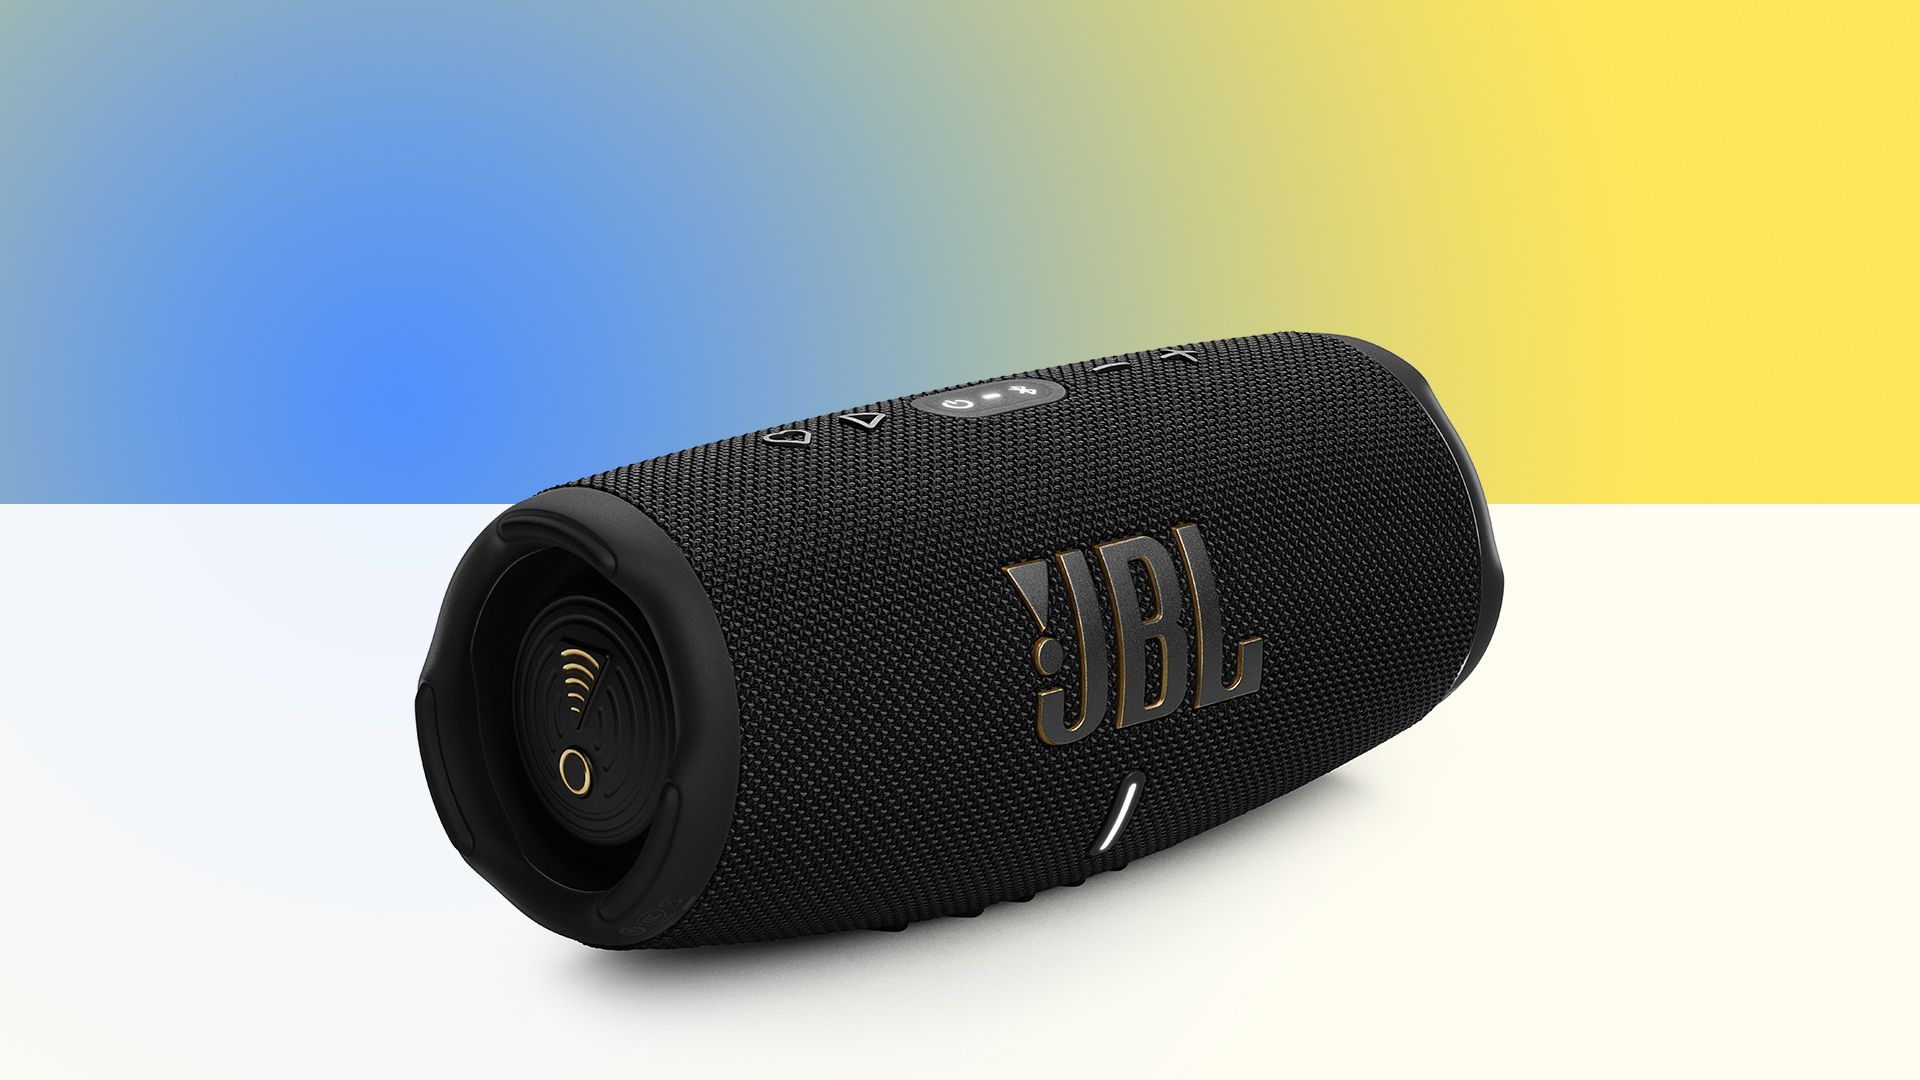 New JBL portable speakers take on Sonos with WiFi and Dolby Atmos